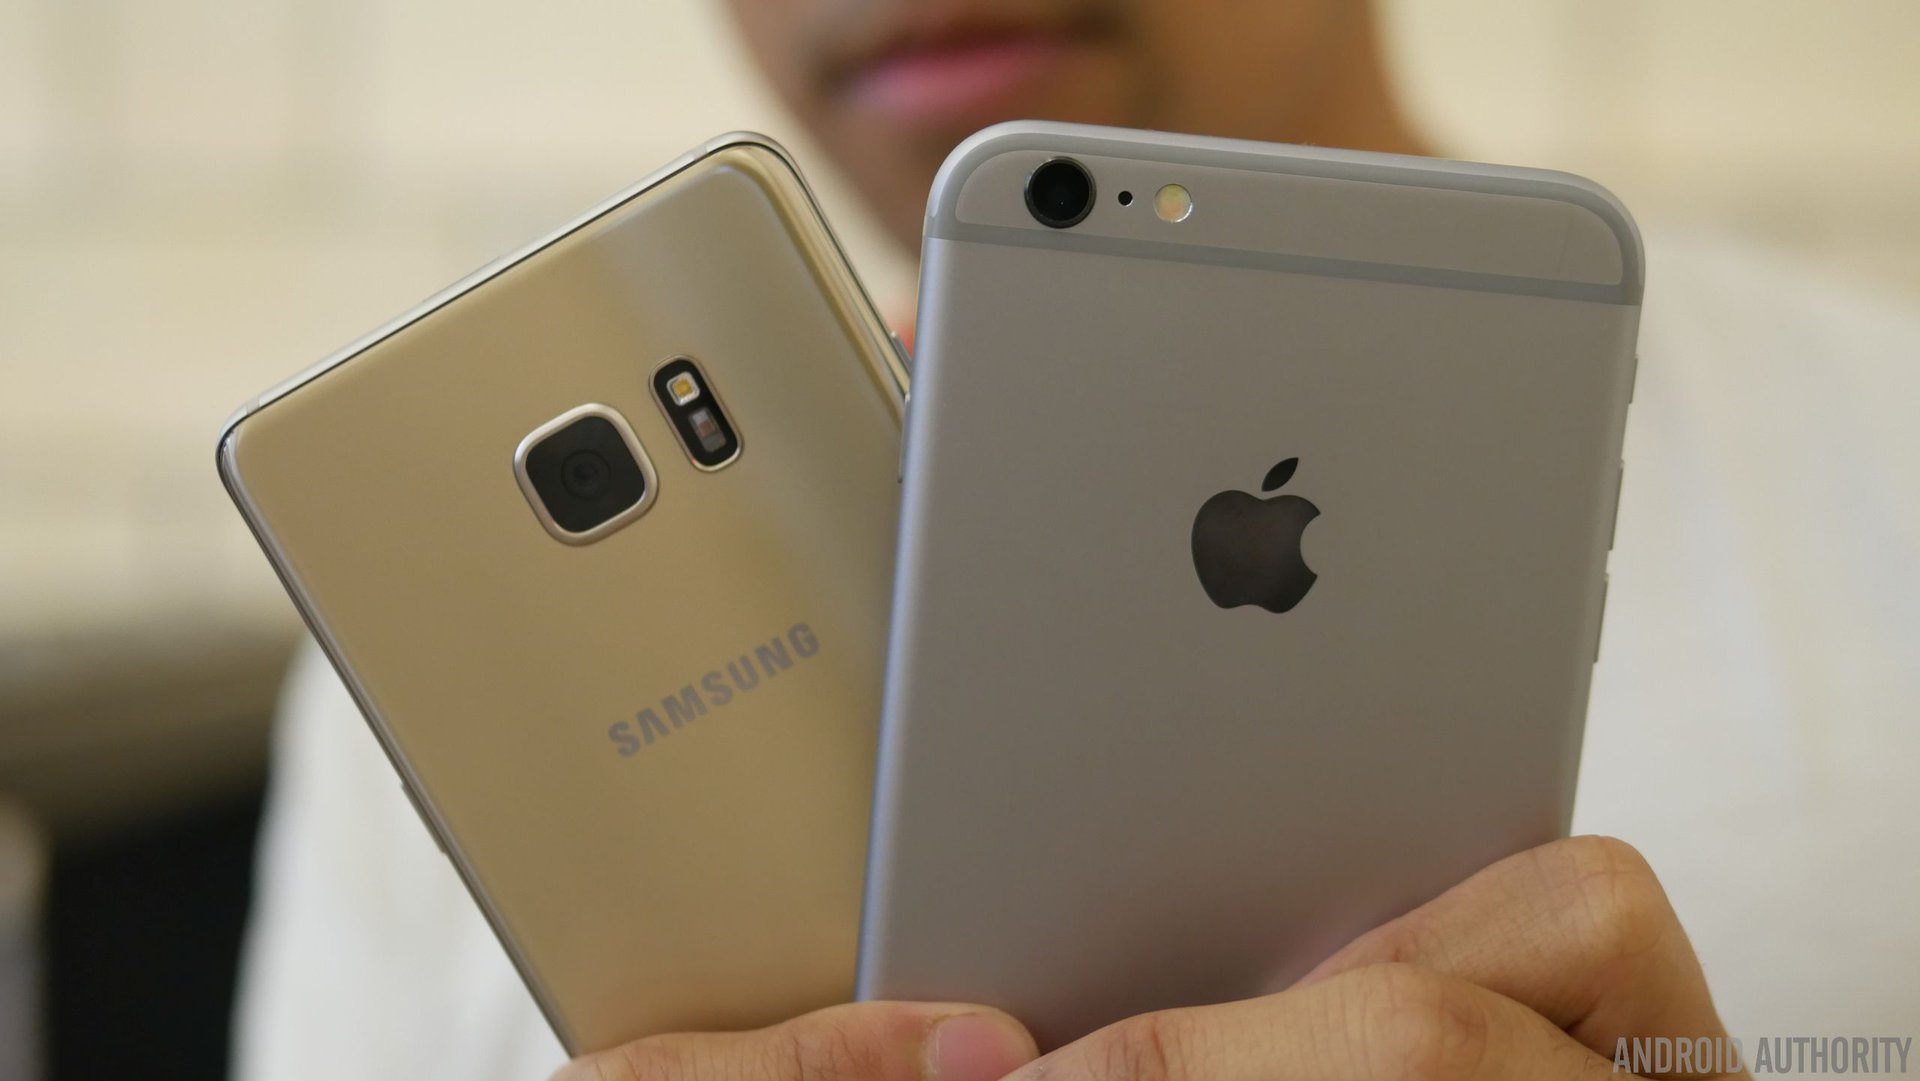 Samsung Galaxy Note 7 vs Apple iPhone 6s Plus first look 3